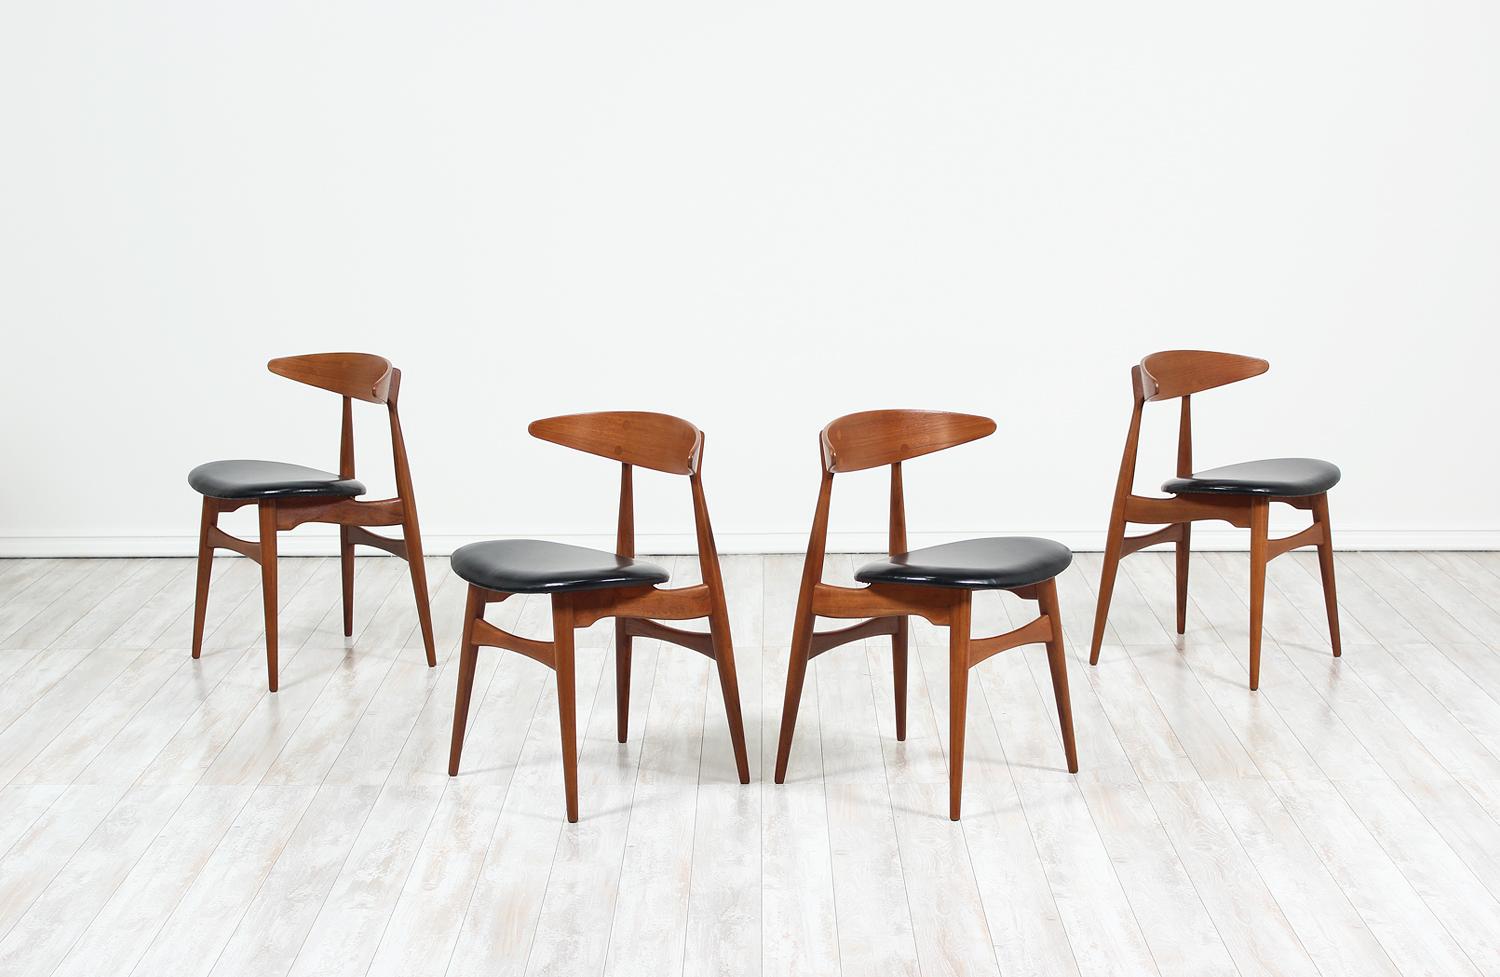 Set of four iconic CH-33 dining chairs designed by Hans J. Wegner for Carl Hansen & Søn in Denmark in 1957. An intricate design that features a uniquely structured seat that appears to float above the inclined, tapered legs and a shell back rest